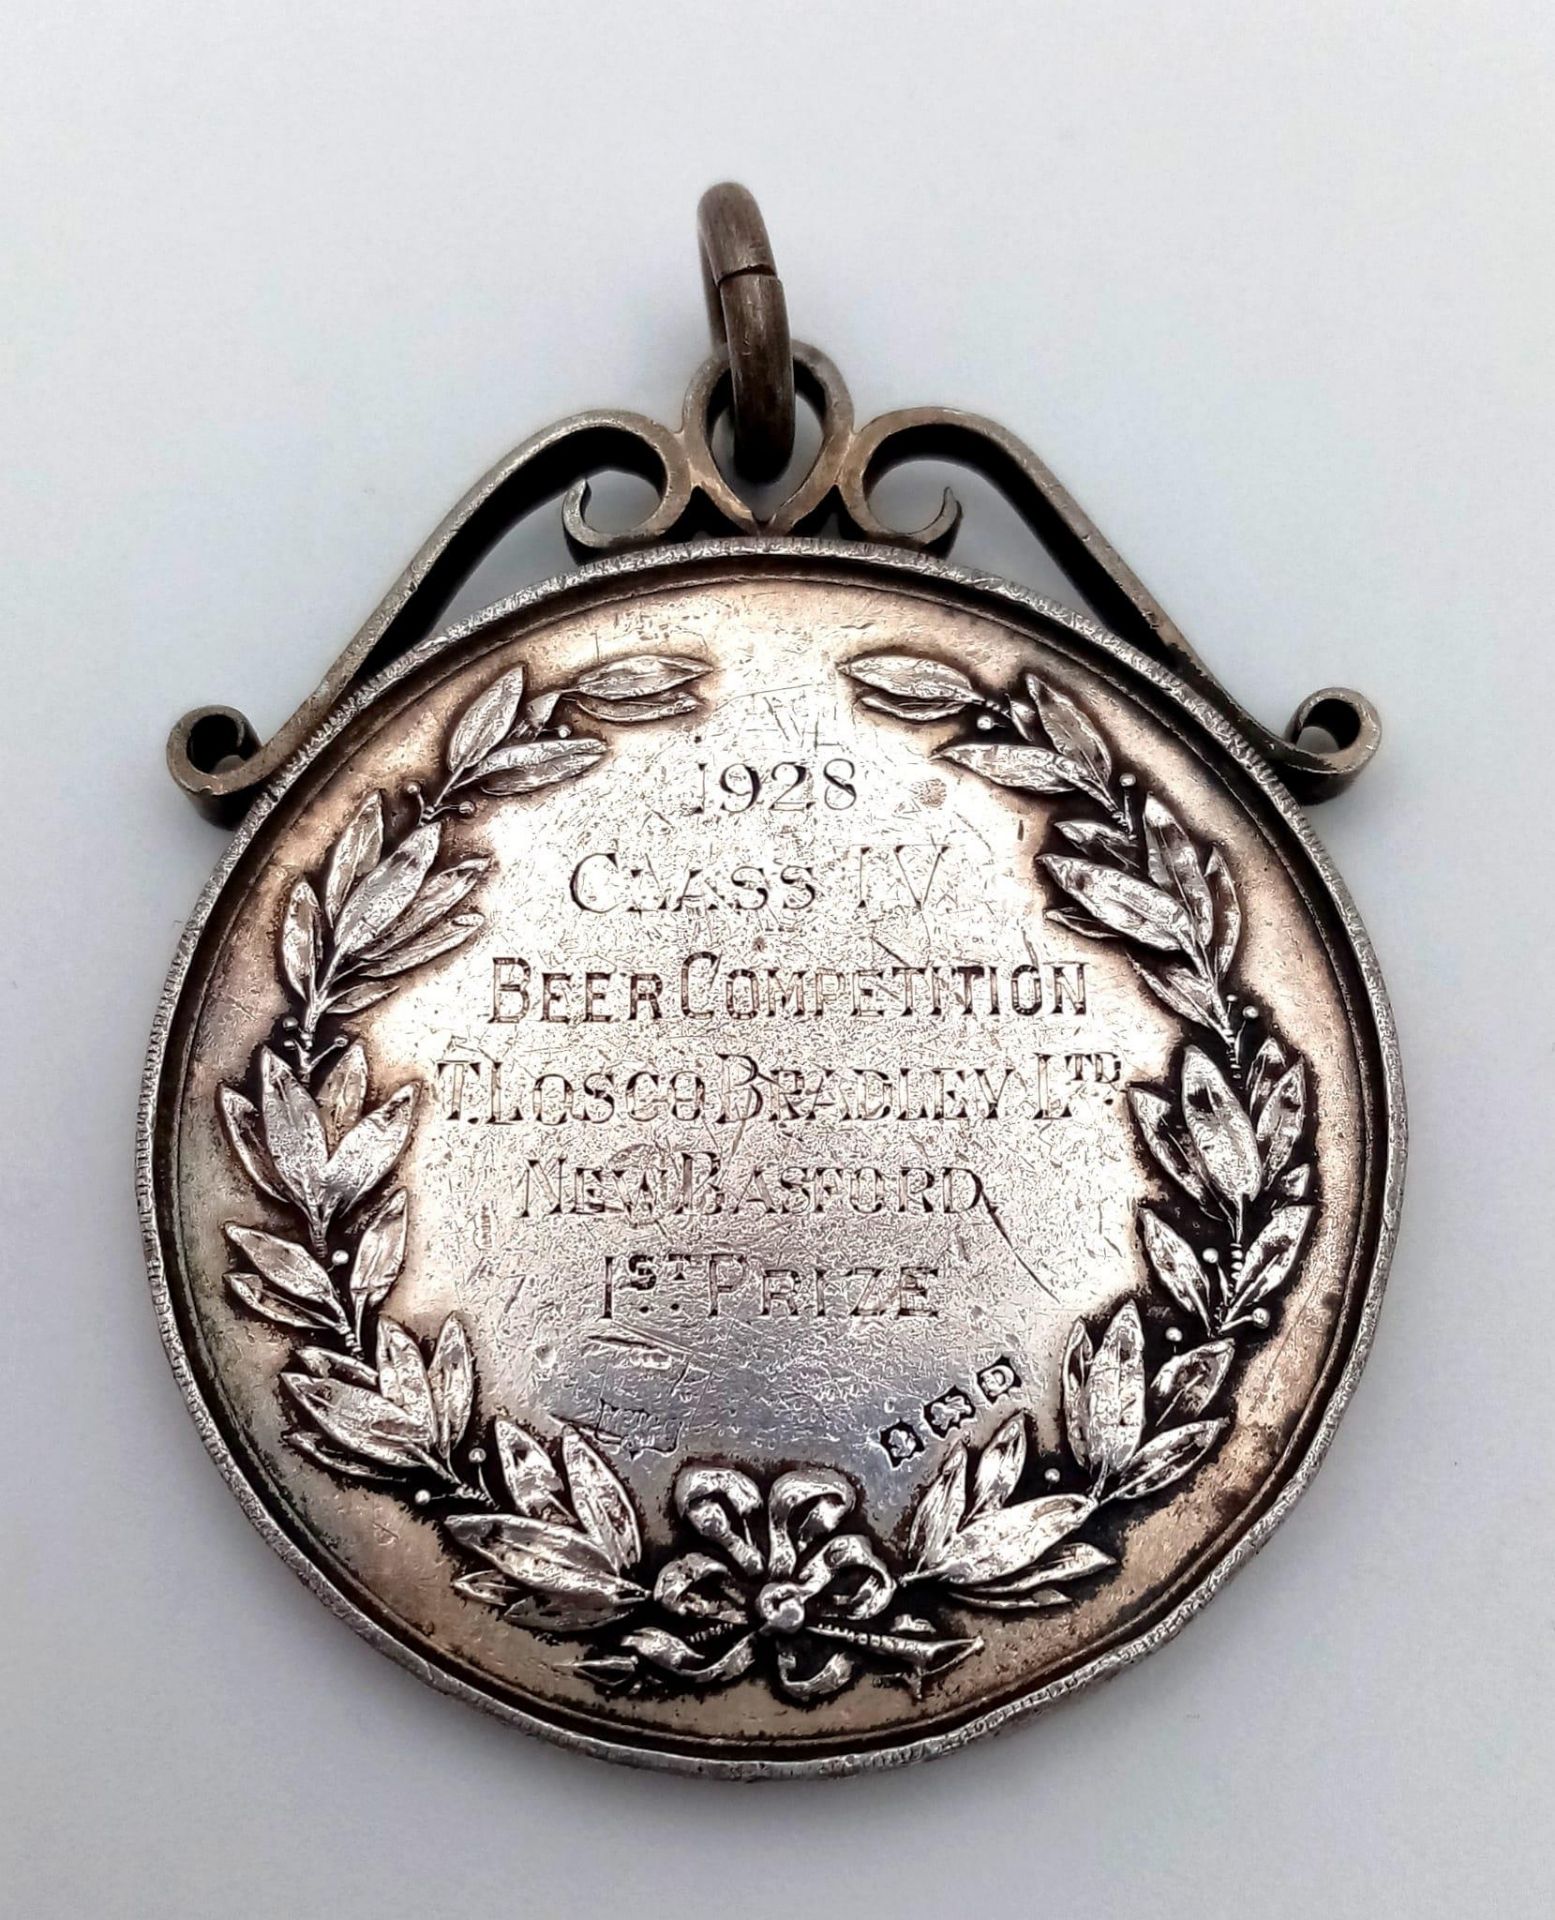 An Antique 1st prize sterling silver medal dated 1928 in the beer competition awarded to T.Losco - Image 2 of 4